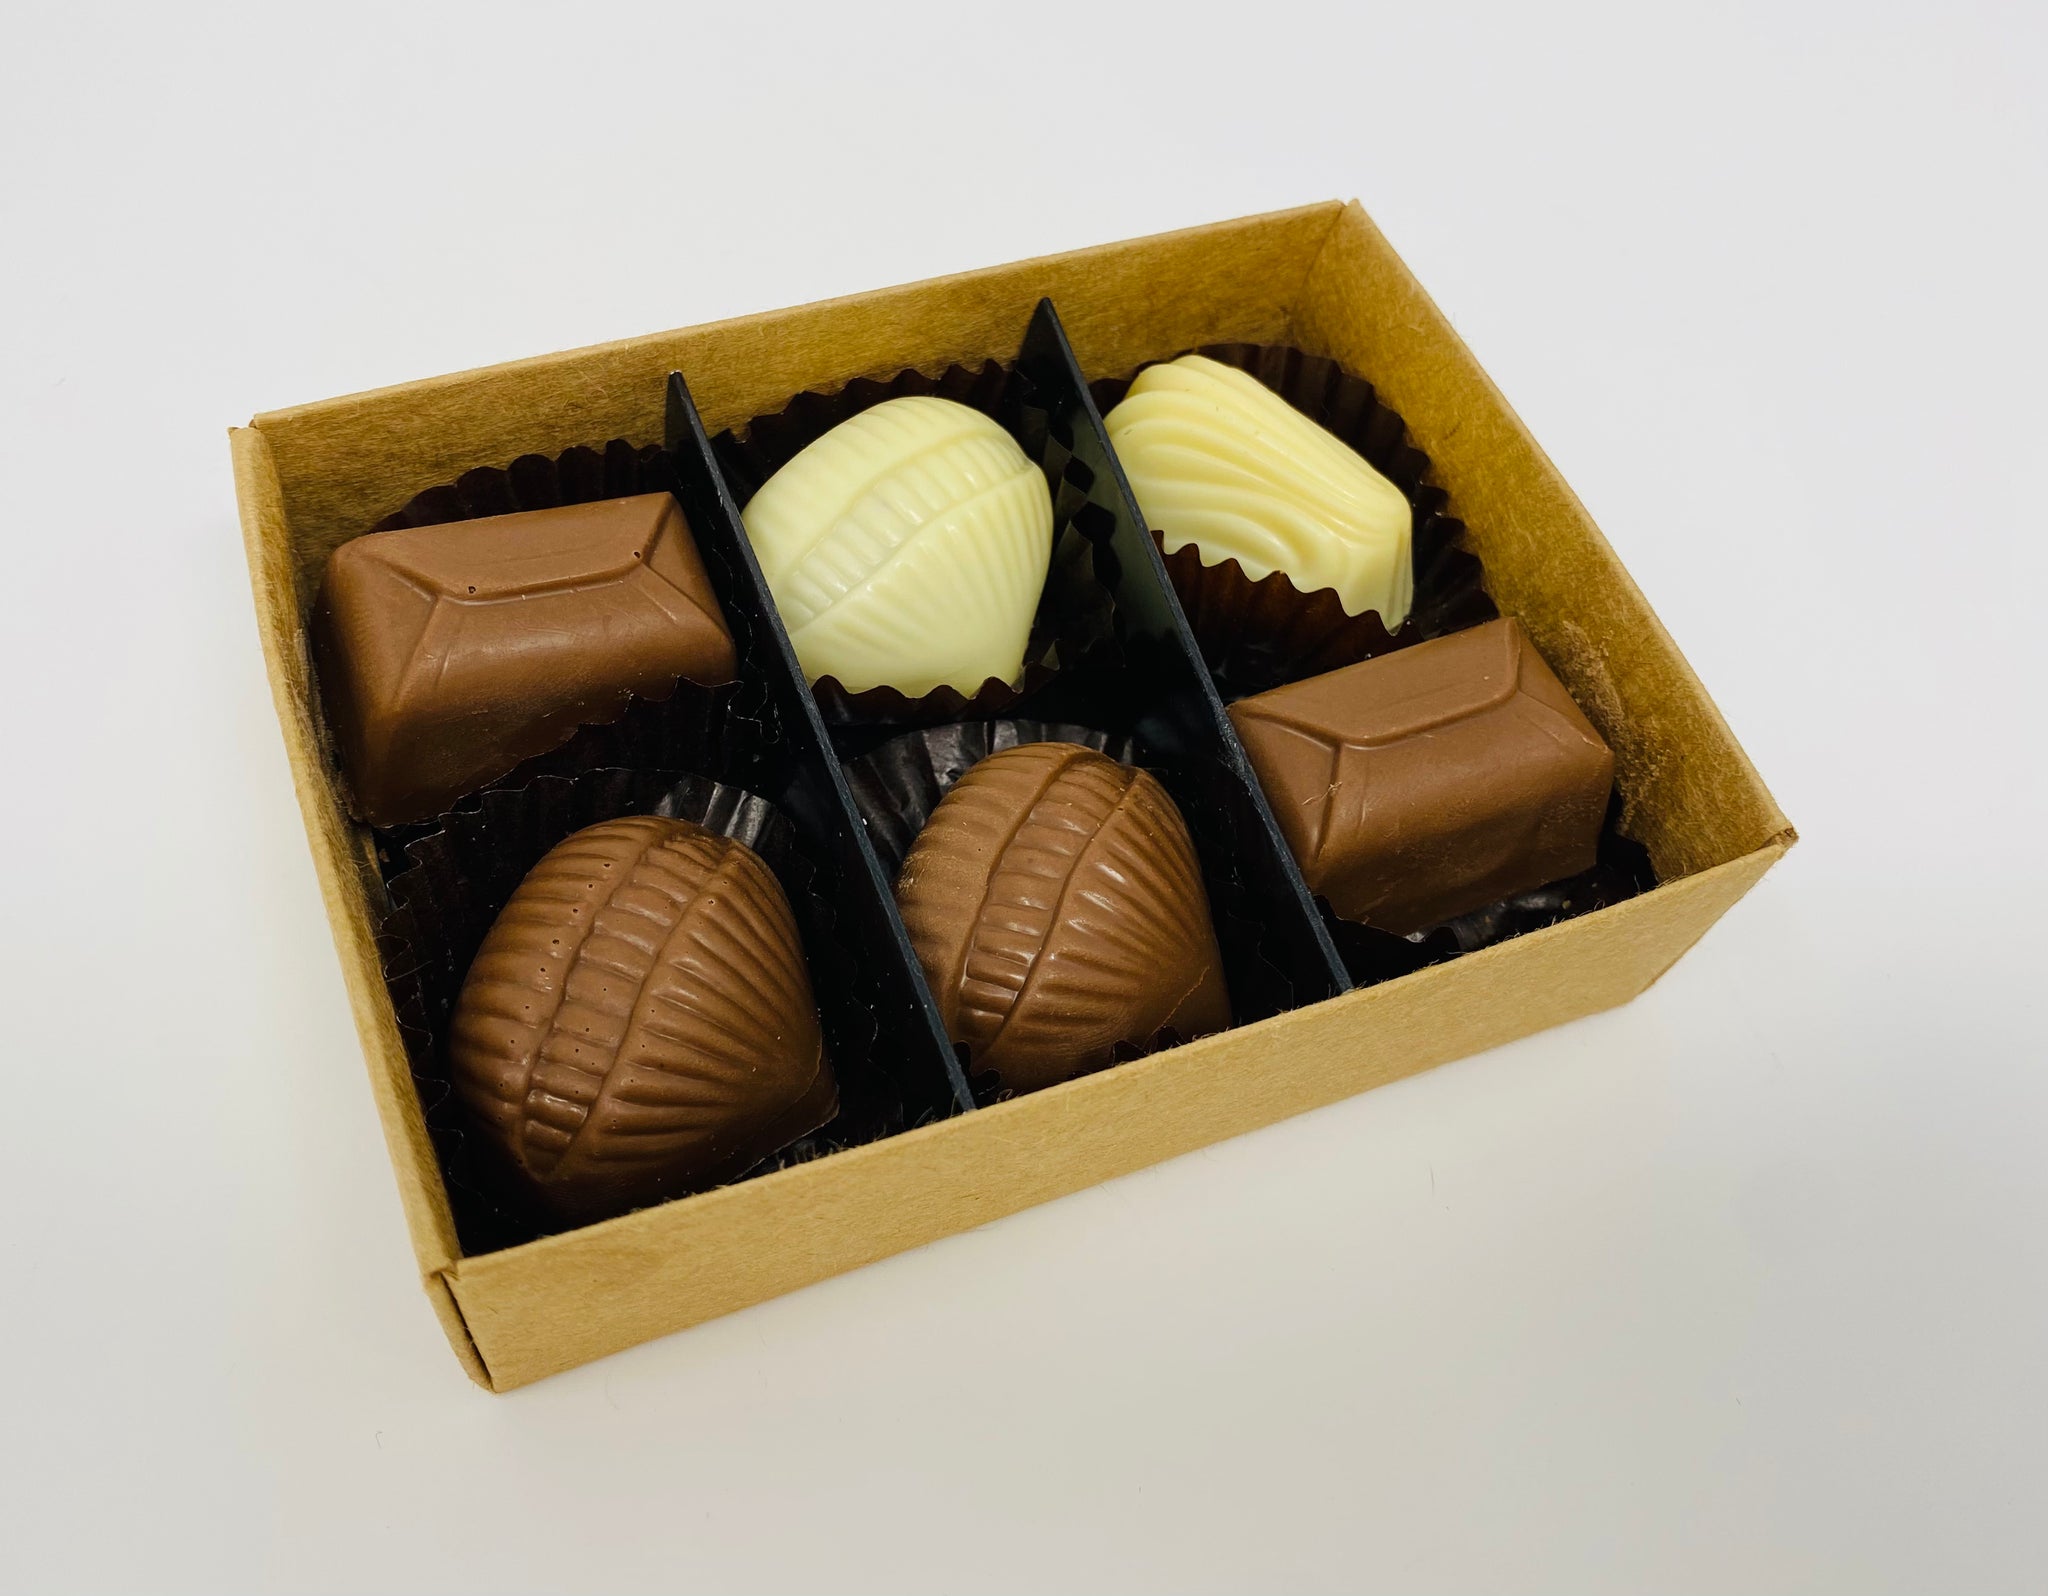 Small Chocolate Boxes